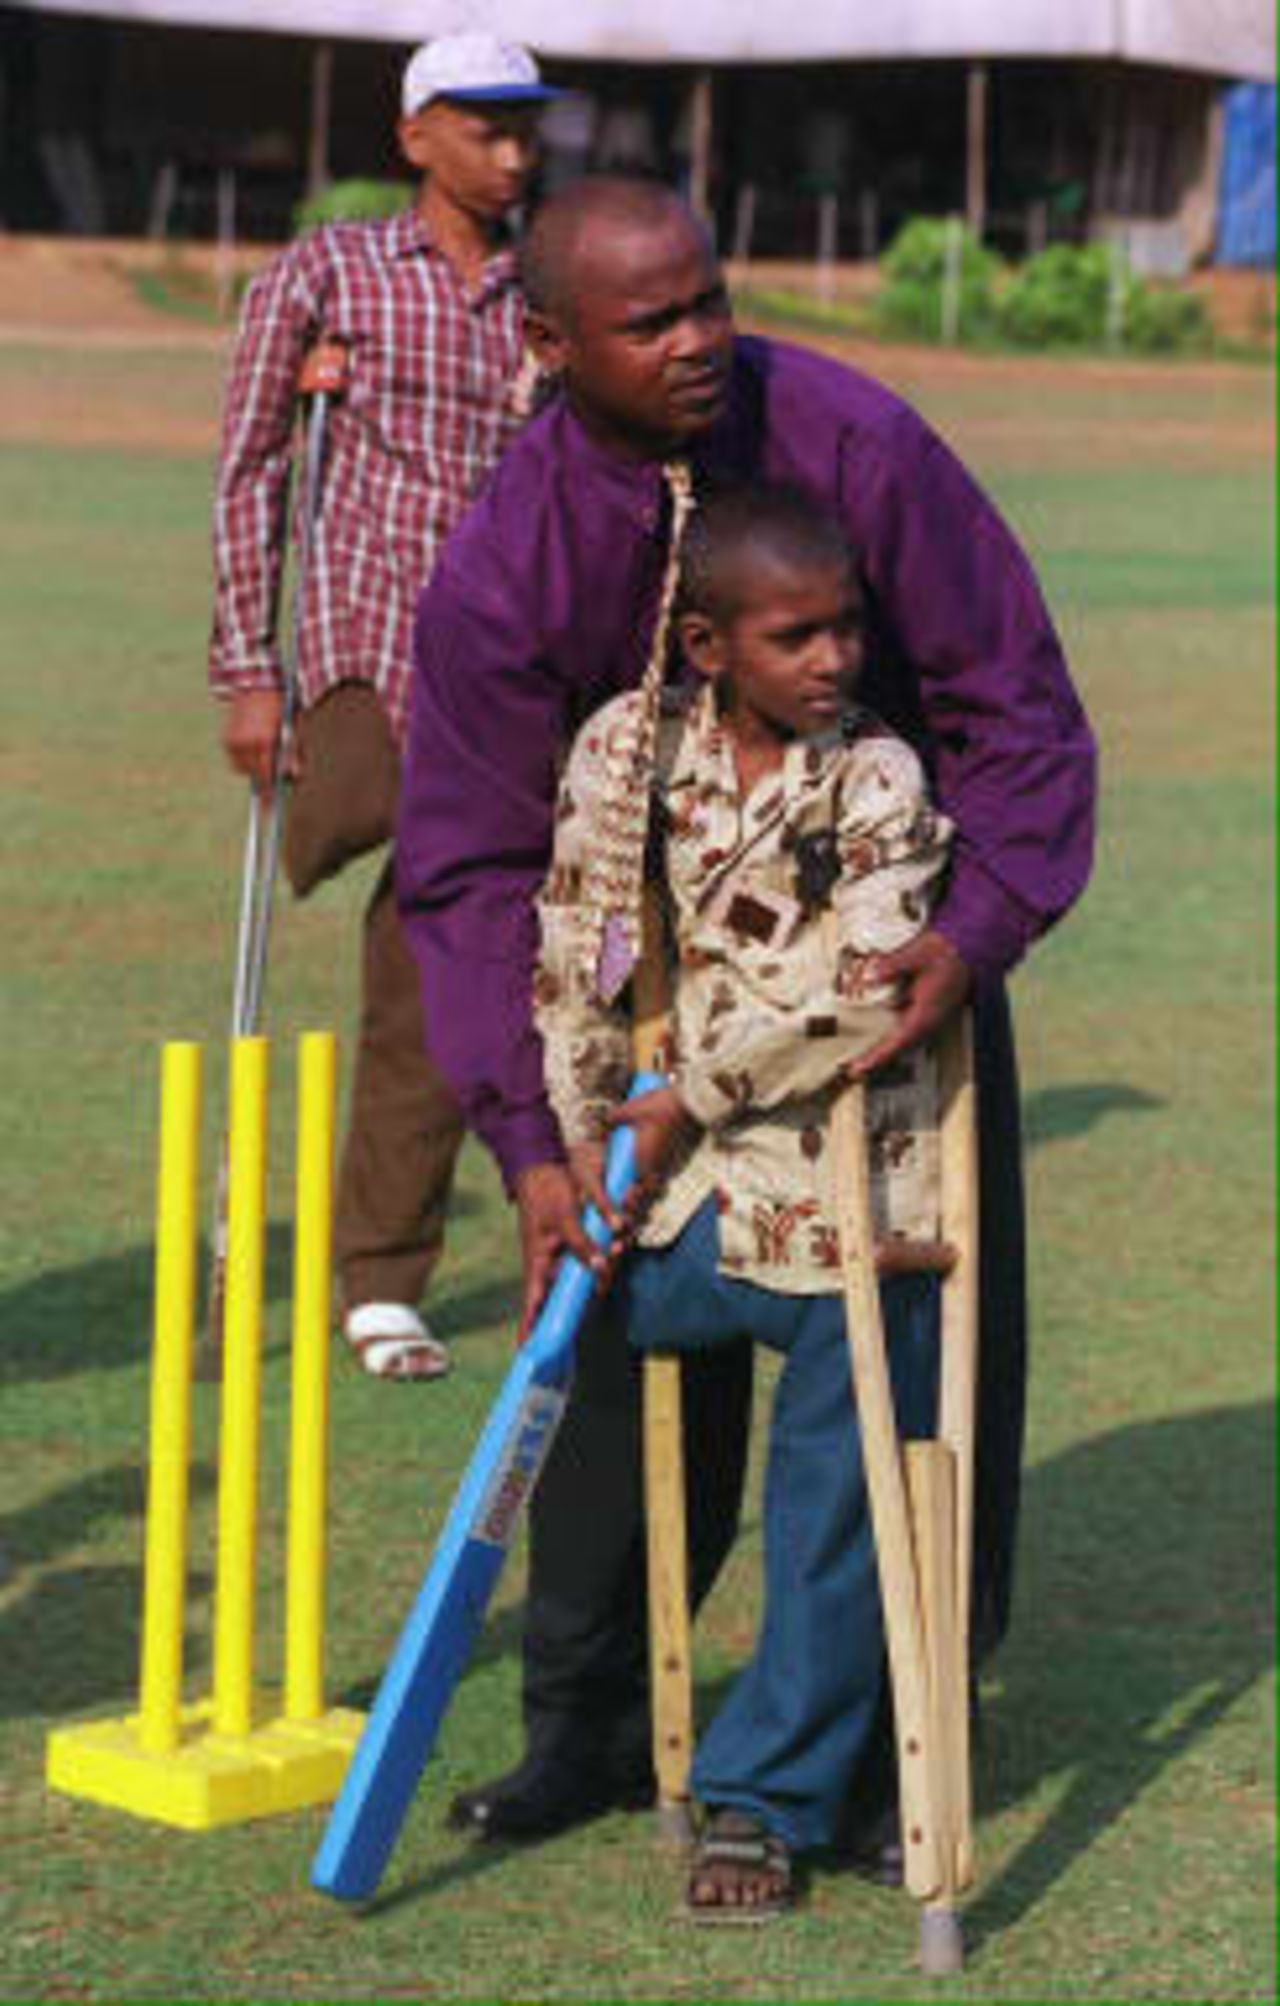 Eight-year old cancer victim Durganand Paswan gets a lesson from  Kambli - 05 March 1999. Fifty children under treatment for cancer met and mixed with sports personalities organised by V Care Foundation.